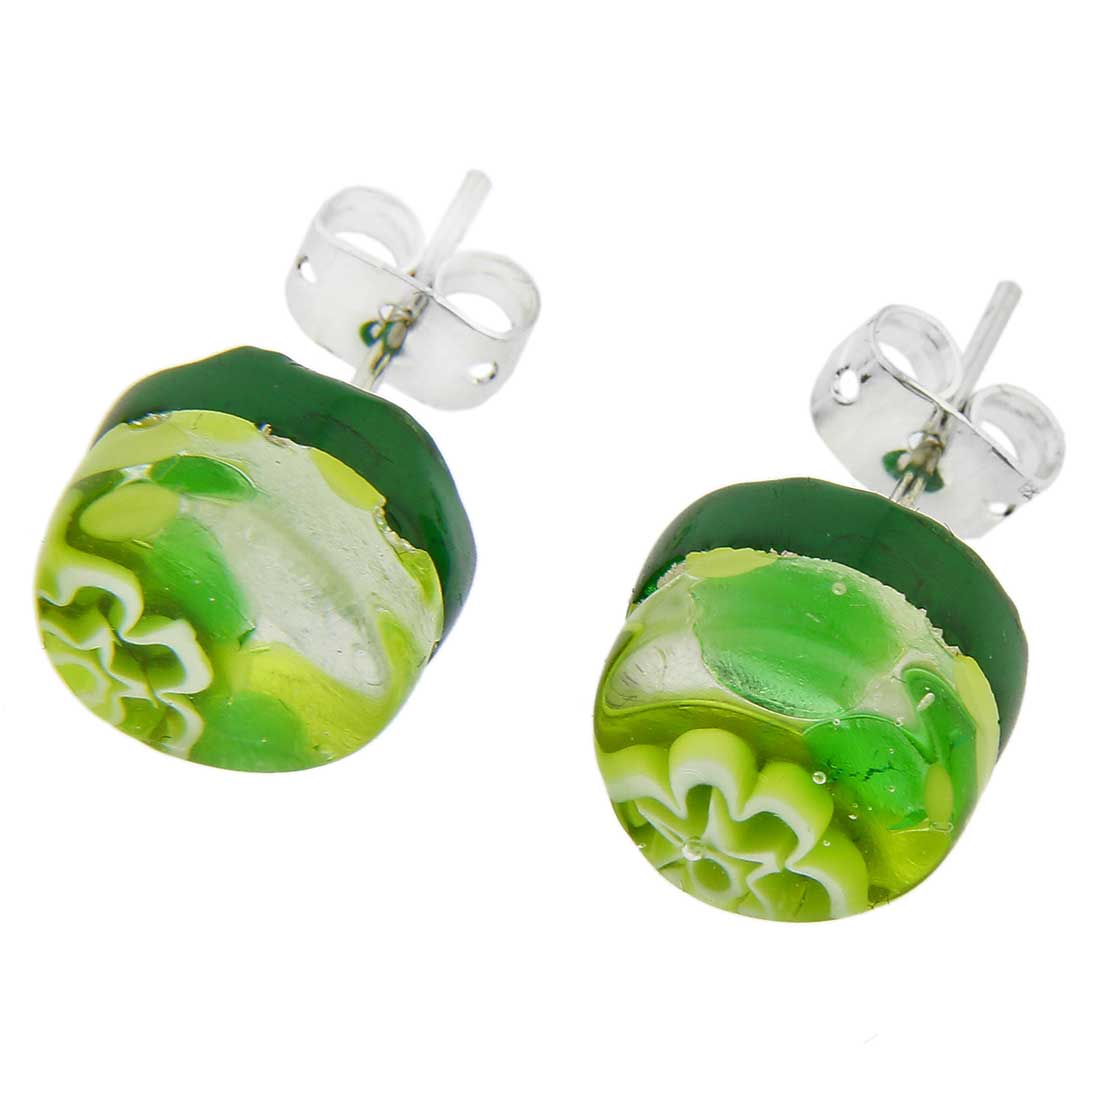 Venetian Reflections Round Necklace and Earrings Set - Green Silver